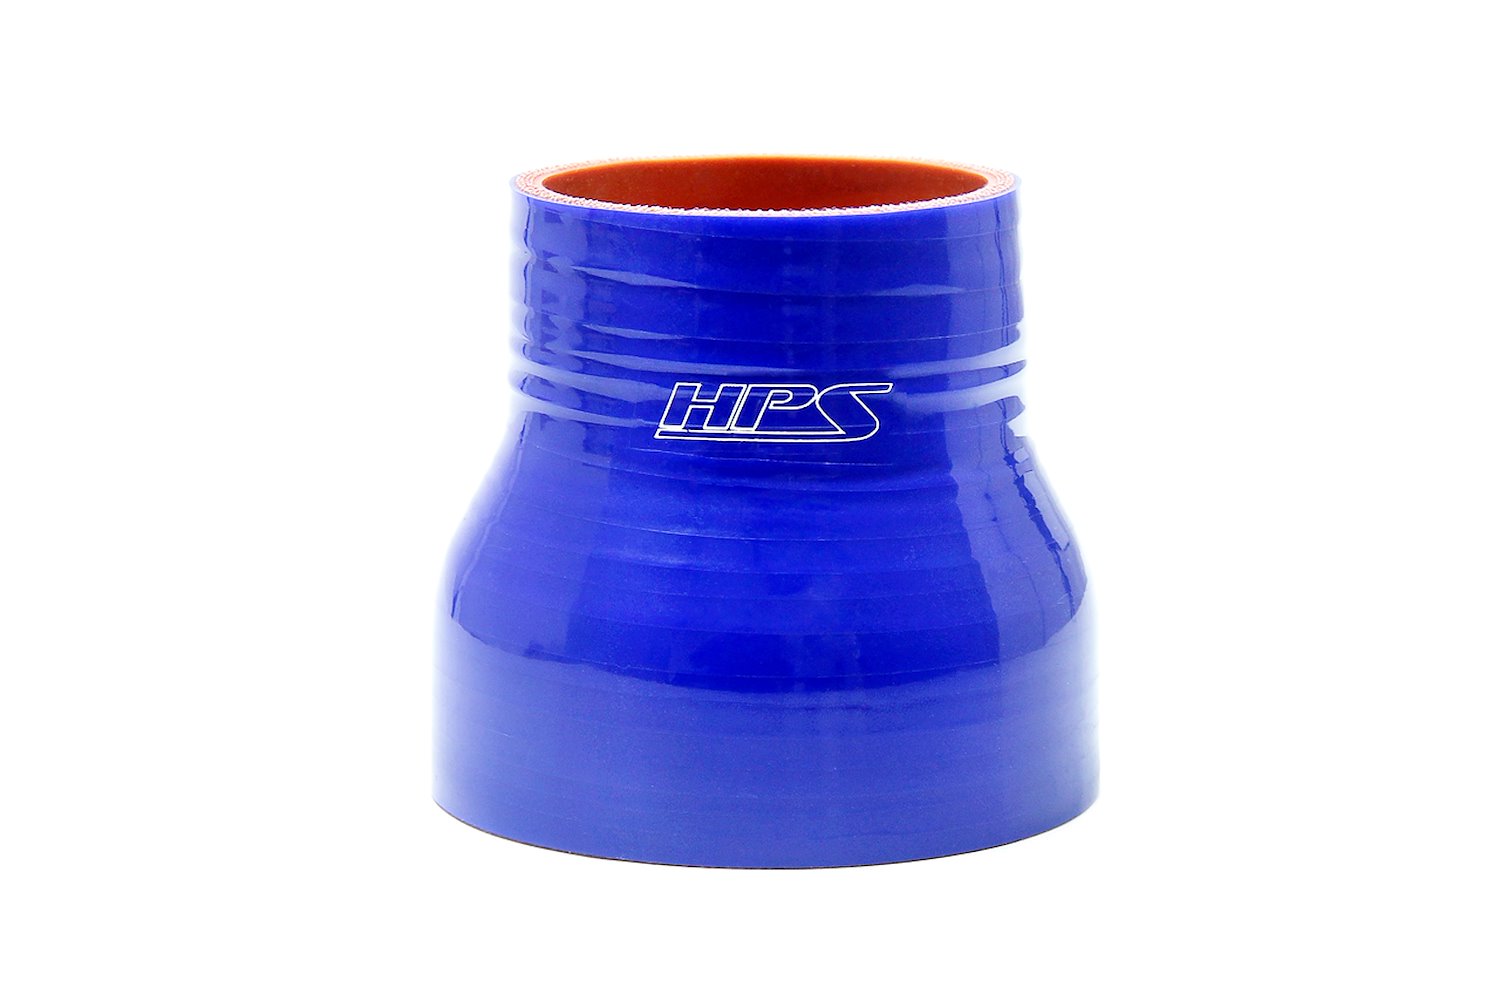 HTSR-338-350-BLUE Silicone Reducer Hose, High-Temp 4-Ply Reinforced, 3-3/8 in. - 3-1/2 in. ID, 3 in. Long, Blue